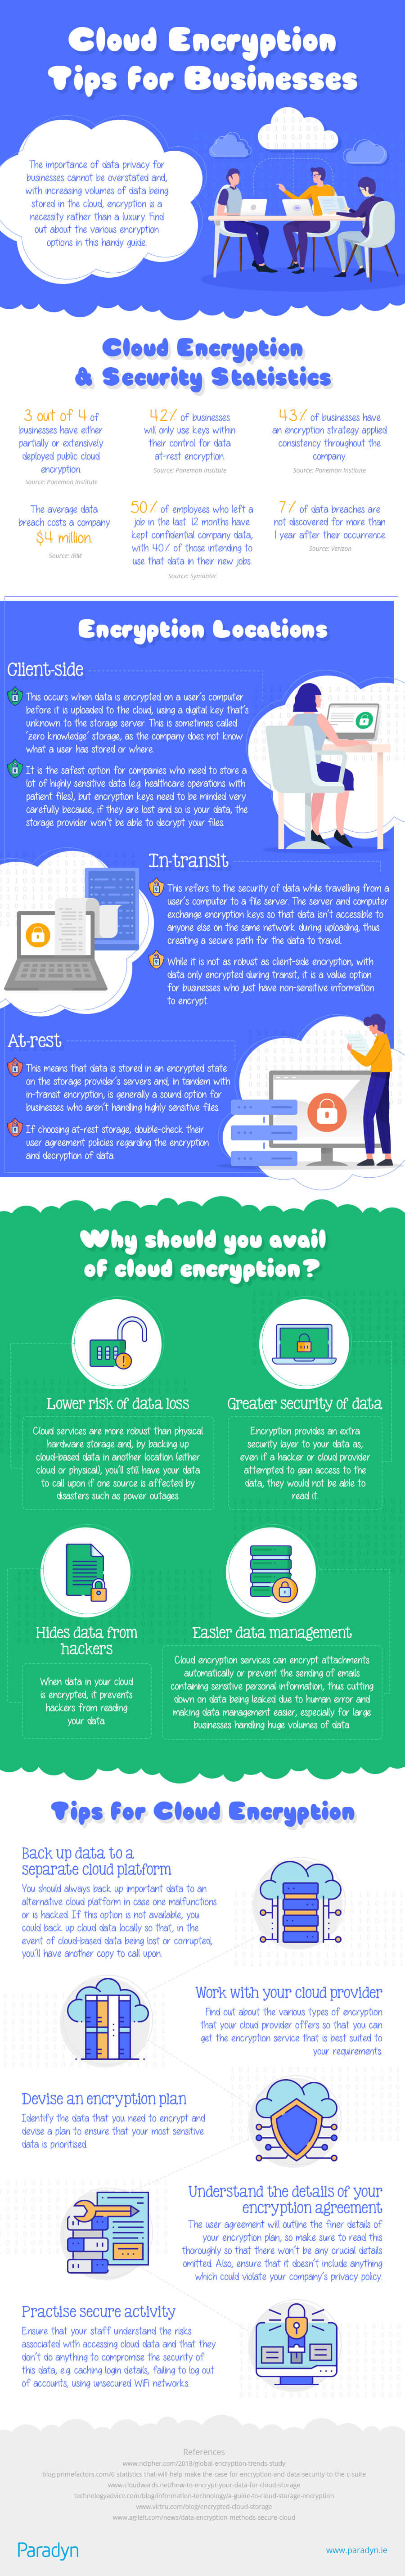 How can businesses better encrypt their data in the cloud? This infographic reveals some tips